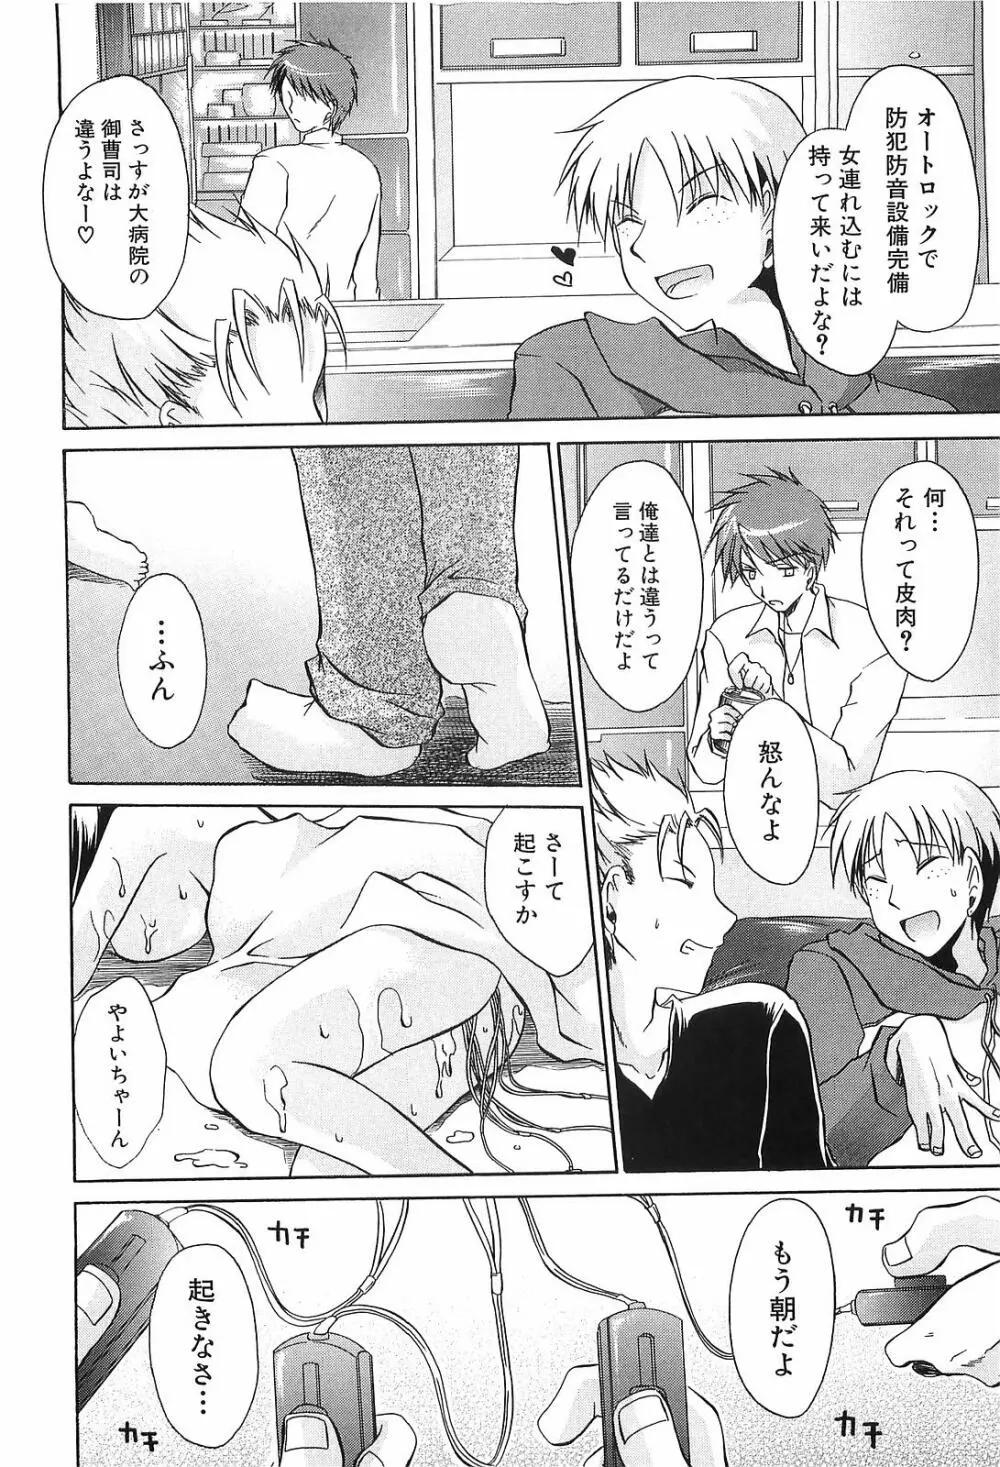 LOVE & HATE 3 FINAL～ENGAGE～通常版 Page.63